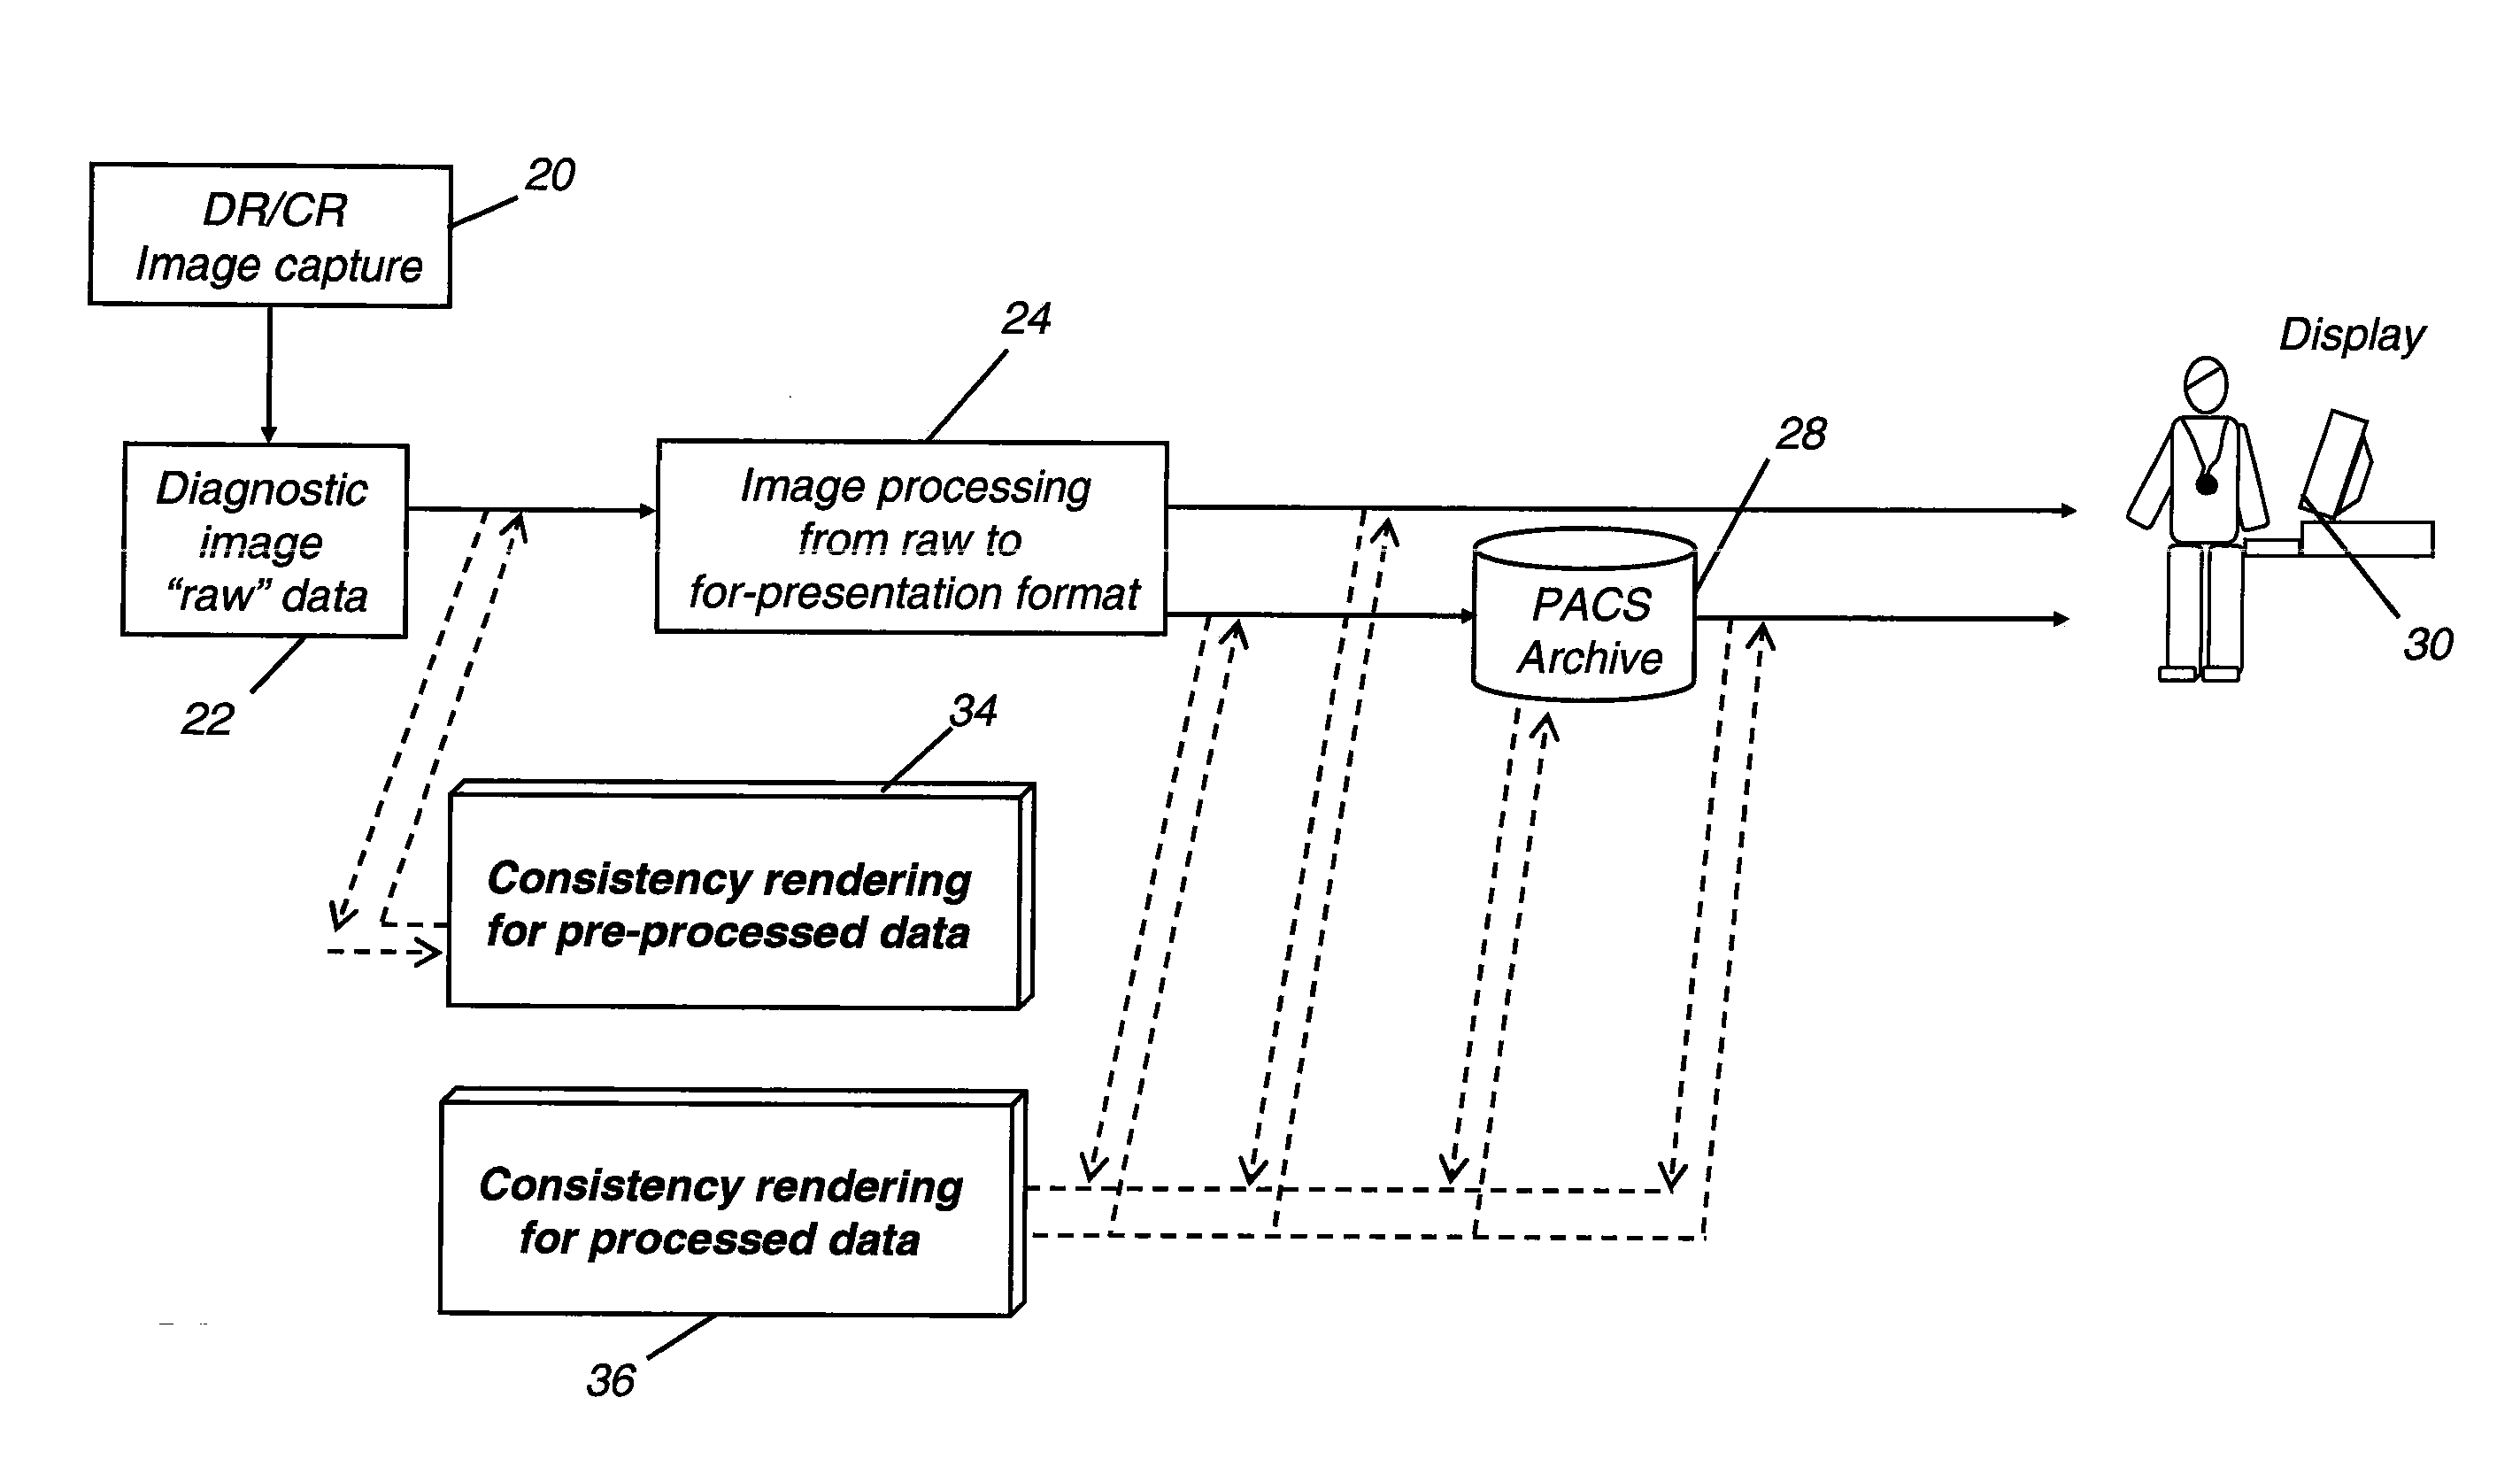 Rendering for improved diagnostic image consistency